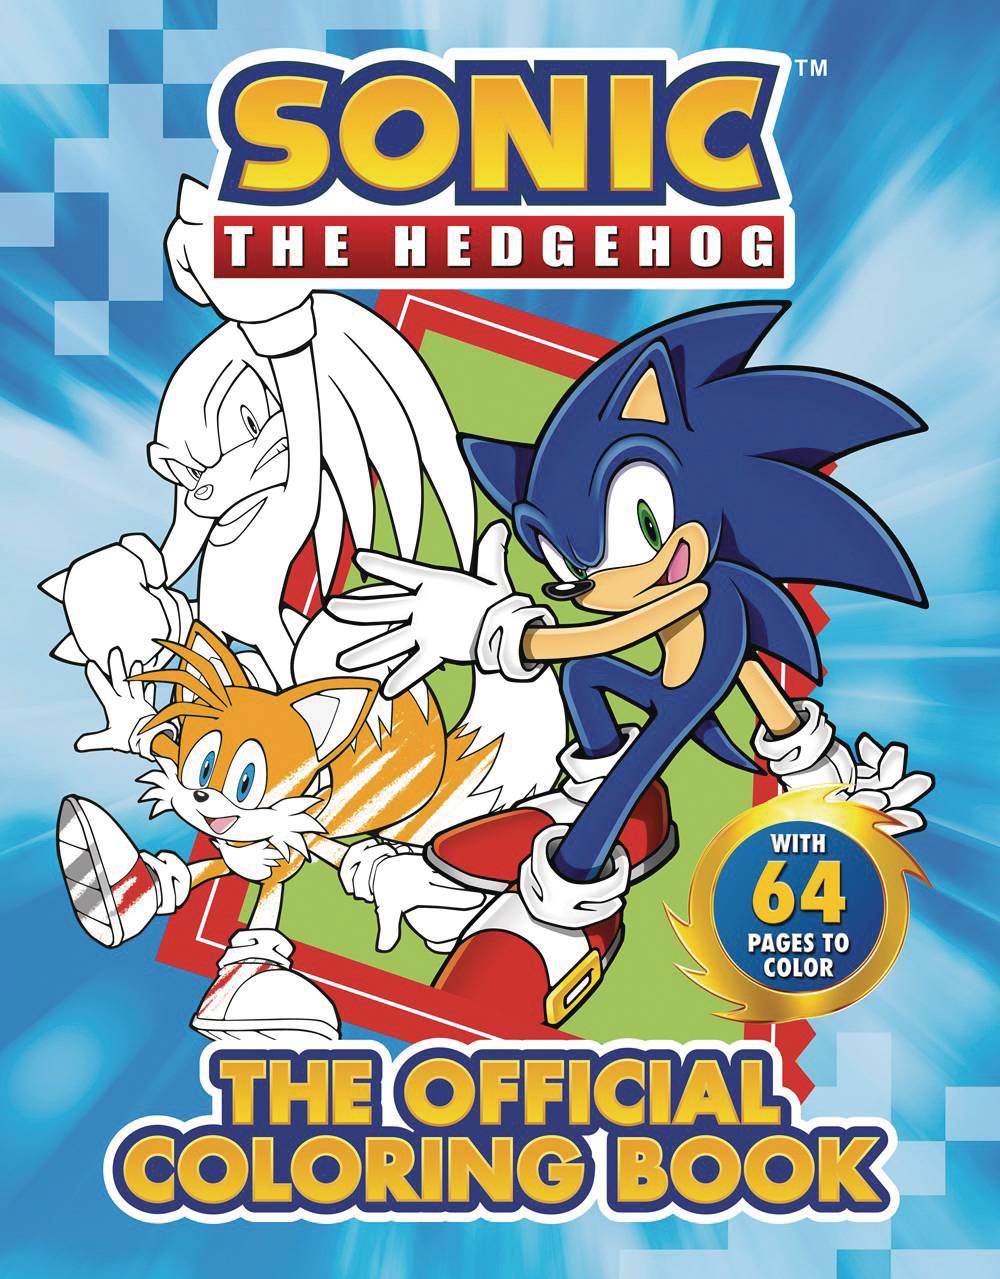 Sonic The Hedgehog The Official Coloring Book